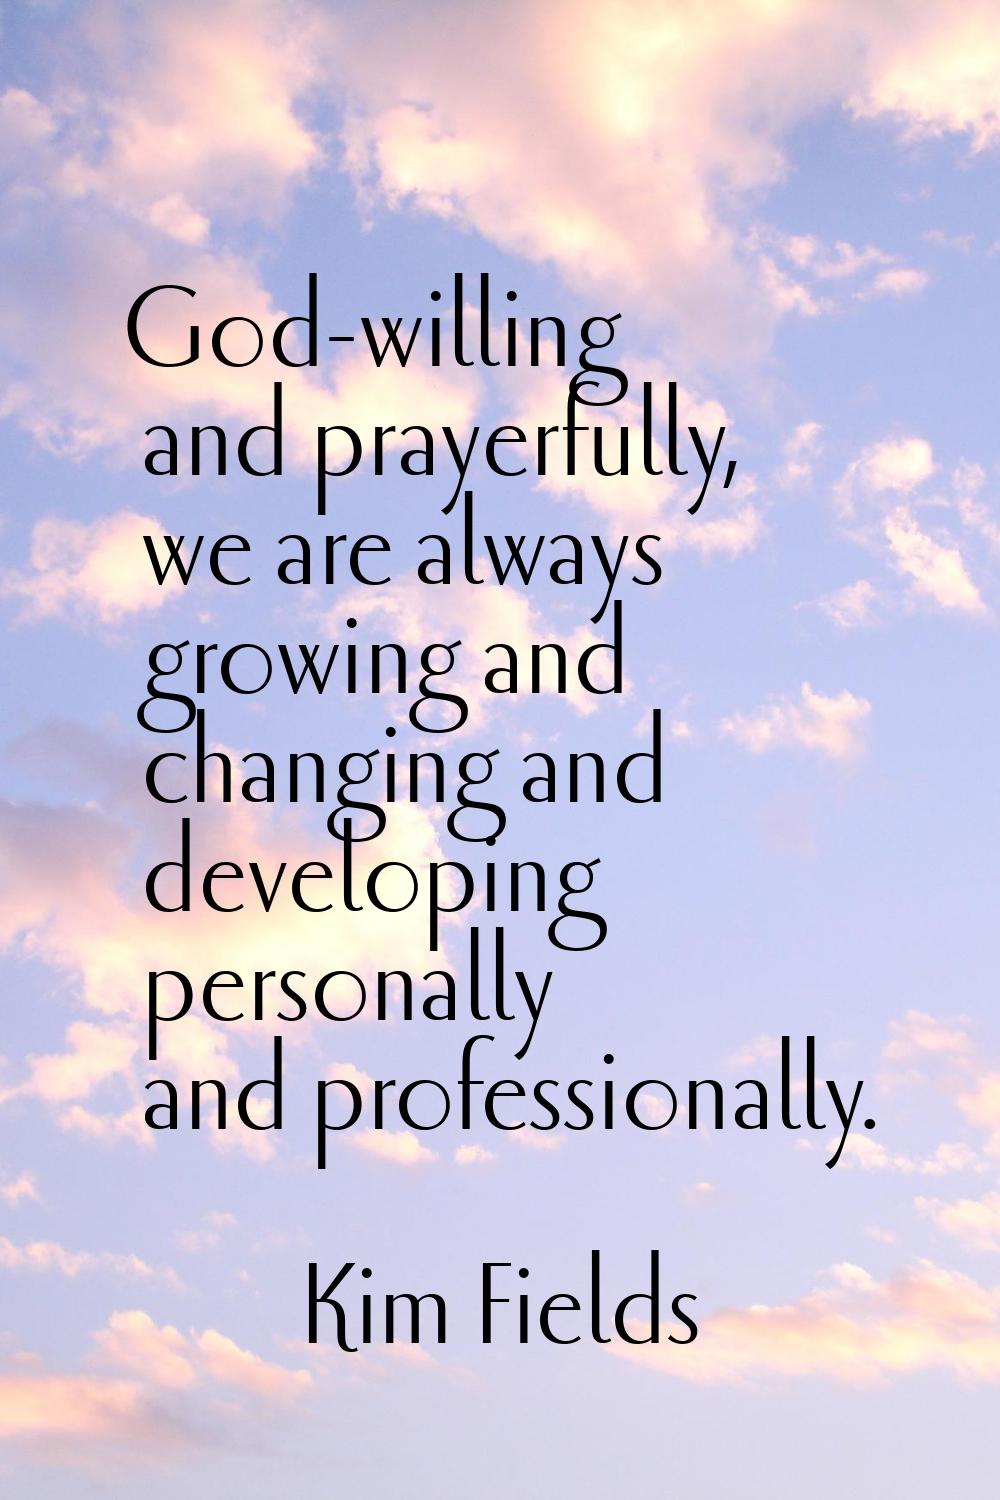 God-willing and prayerfully, we are always growing and changing and developing personally and profe